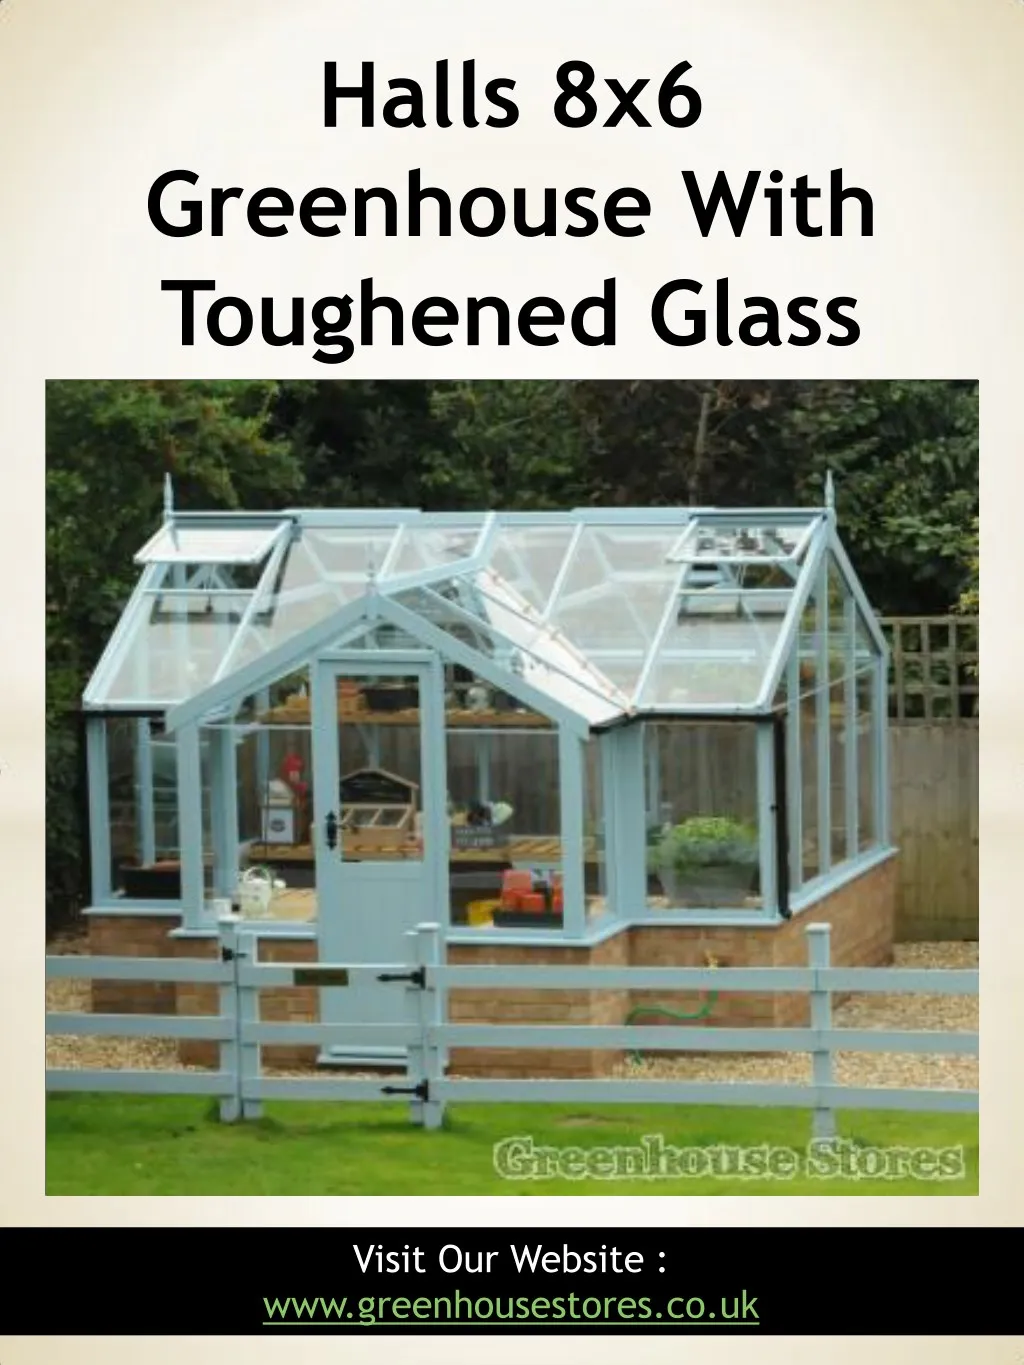 halls 8x6 greenhouse with toughened glass